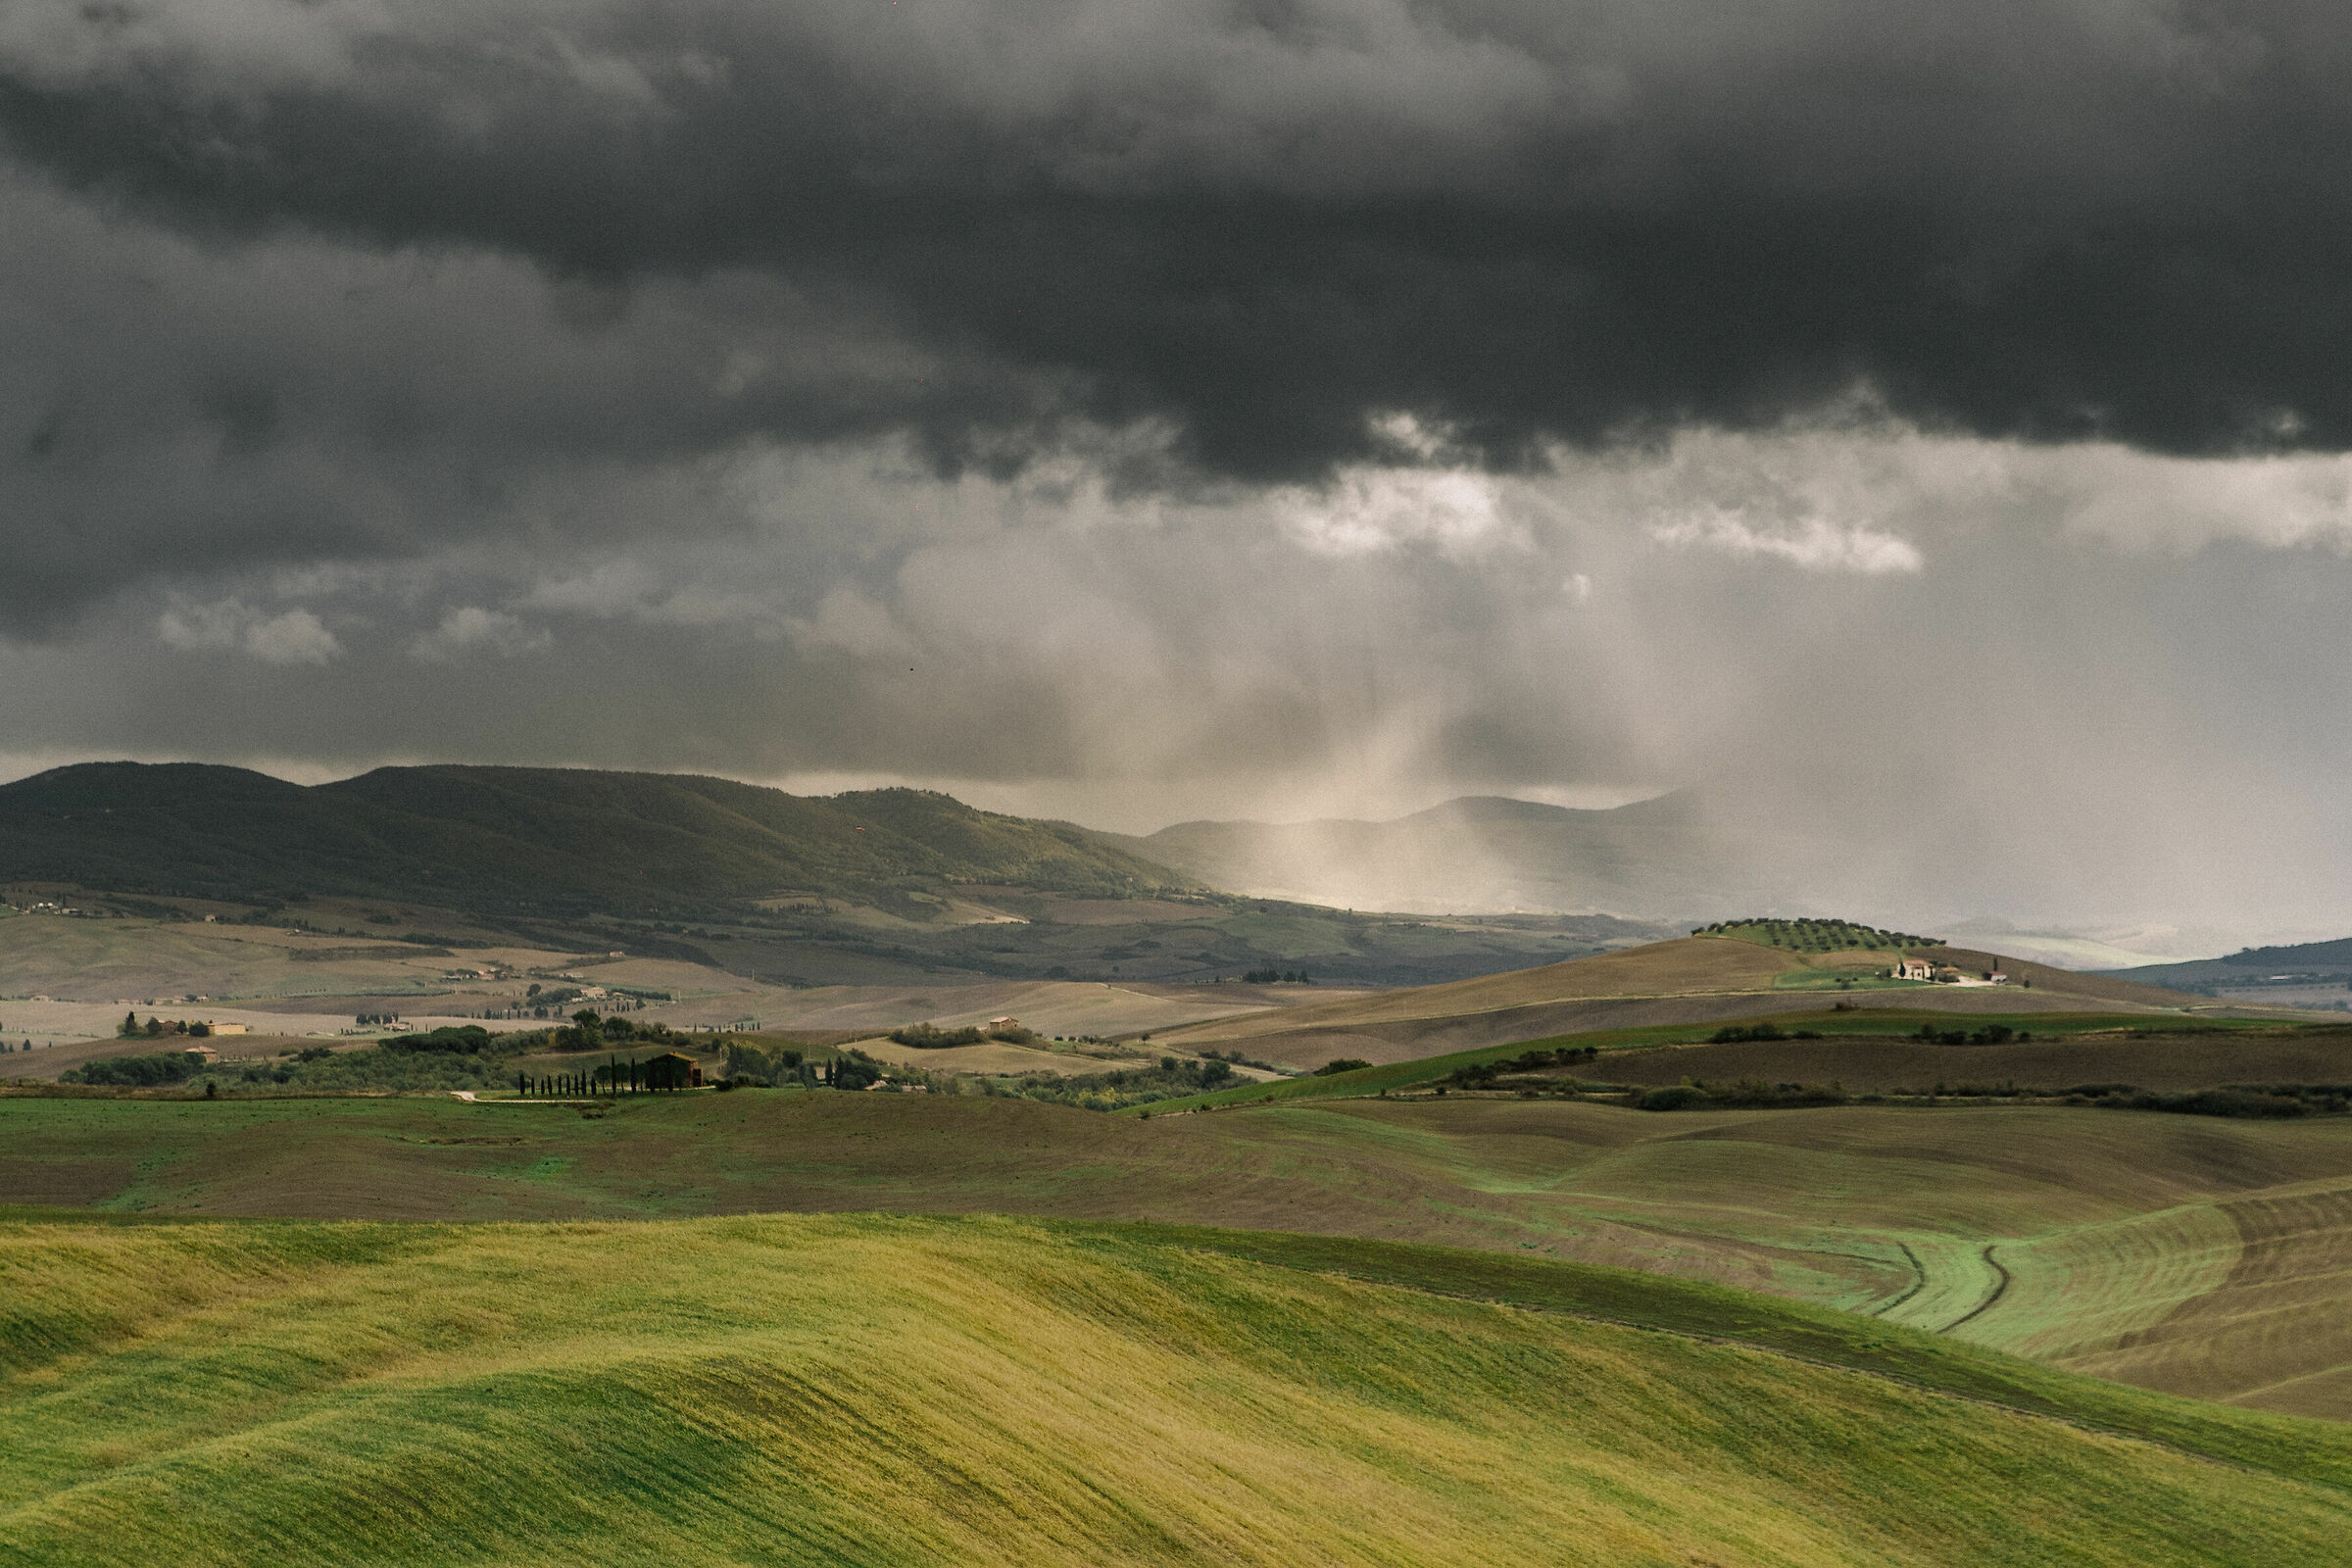 Storm on the horizon (Val d'Orcia)...